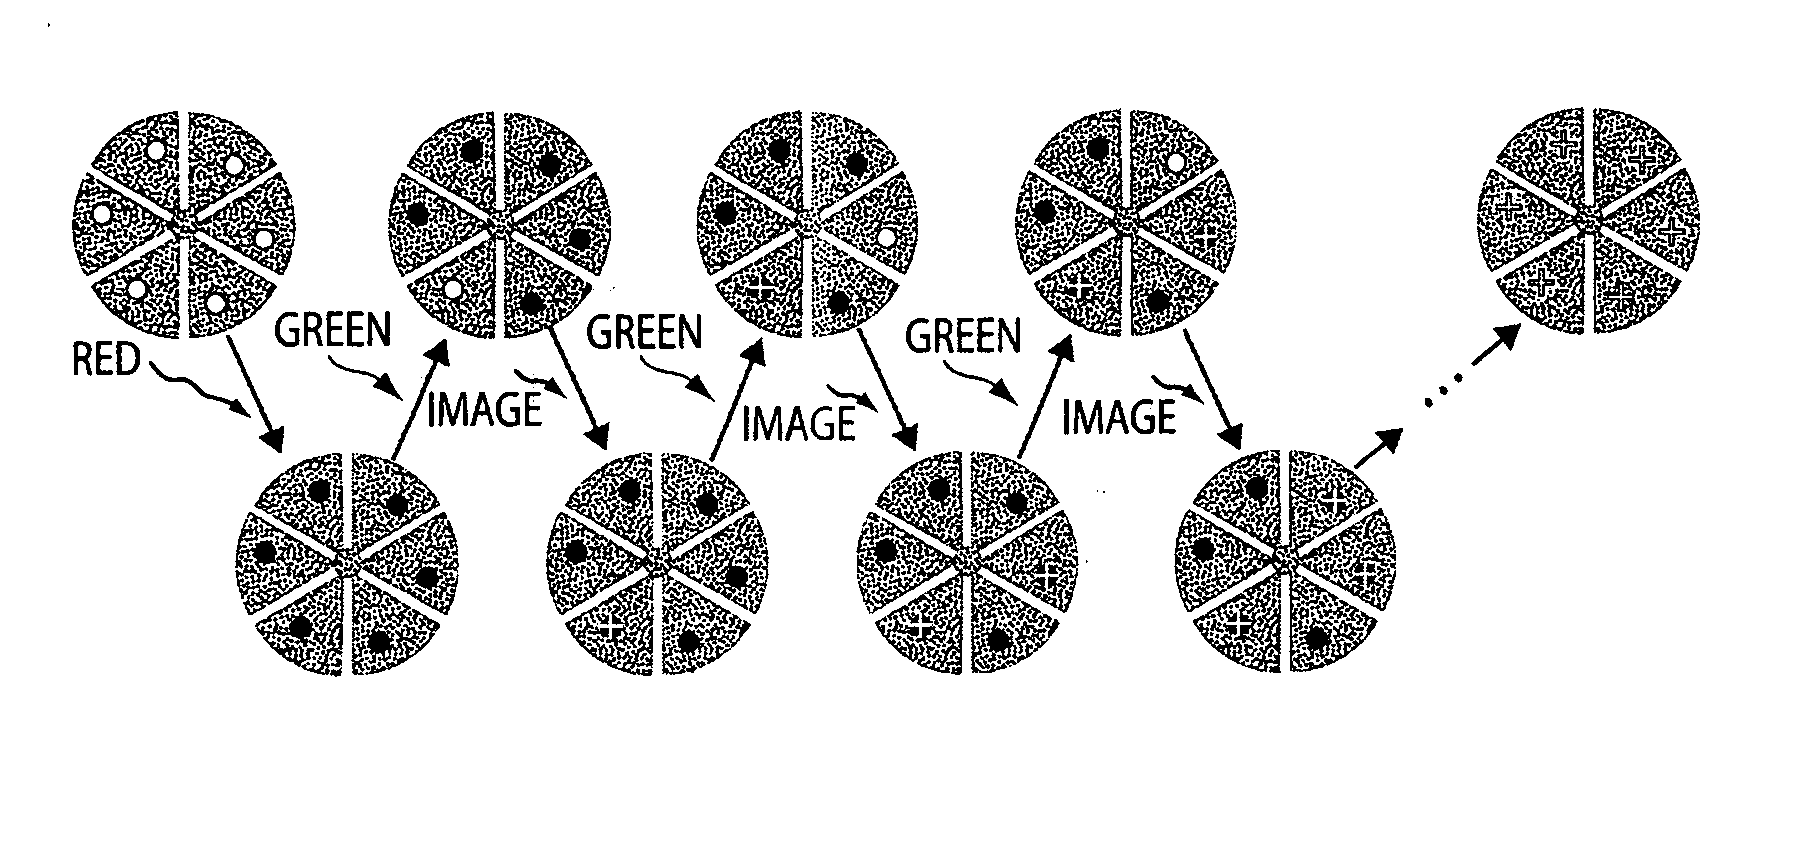 Sub-diffraction limit image resolution and other imaging techniques